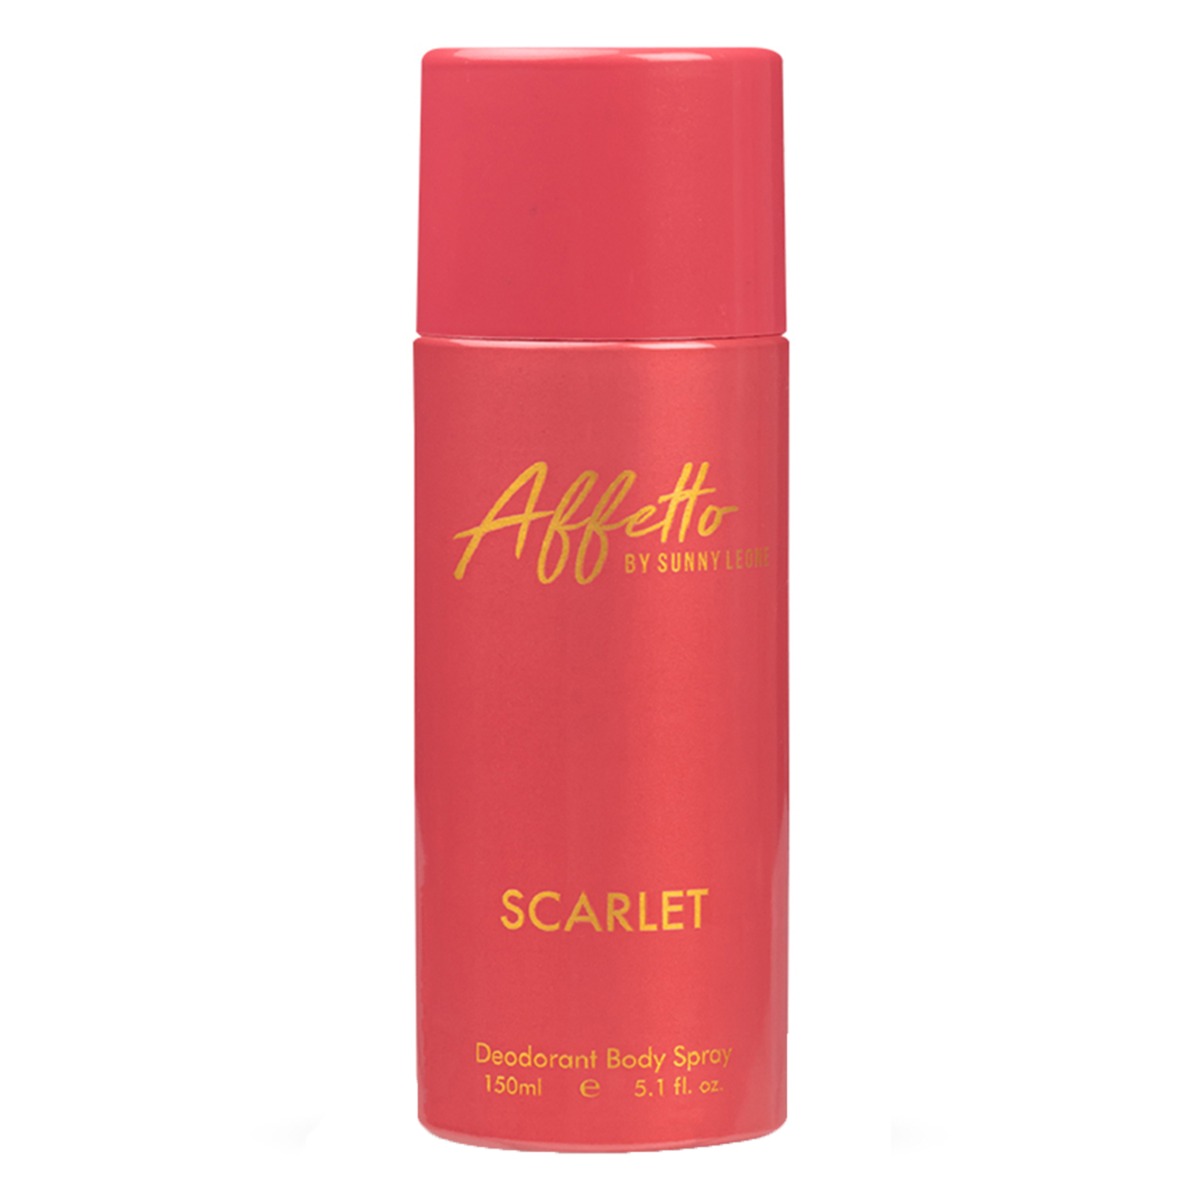 Star Struck by Sunny Leone Affetto by Sunny Leone Deo for Women - Scarlet, 150ml